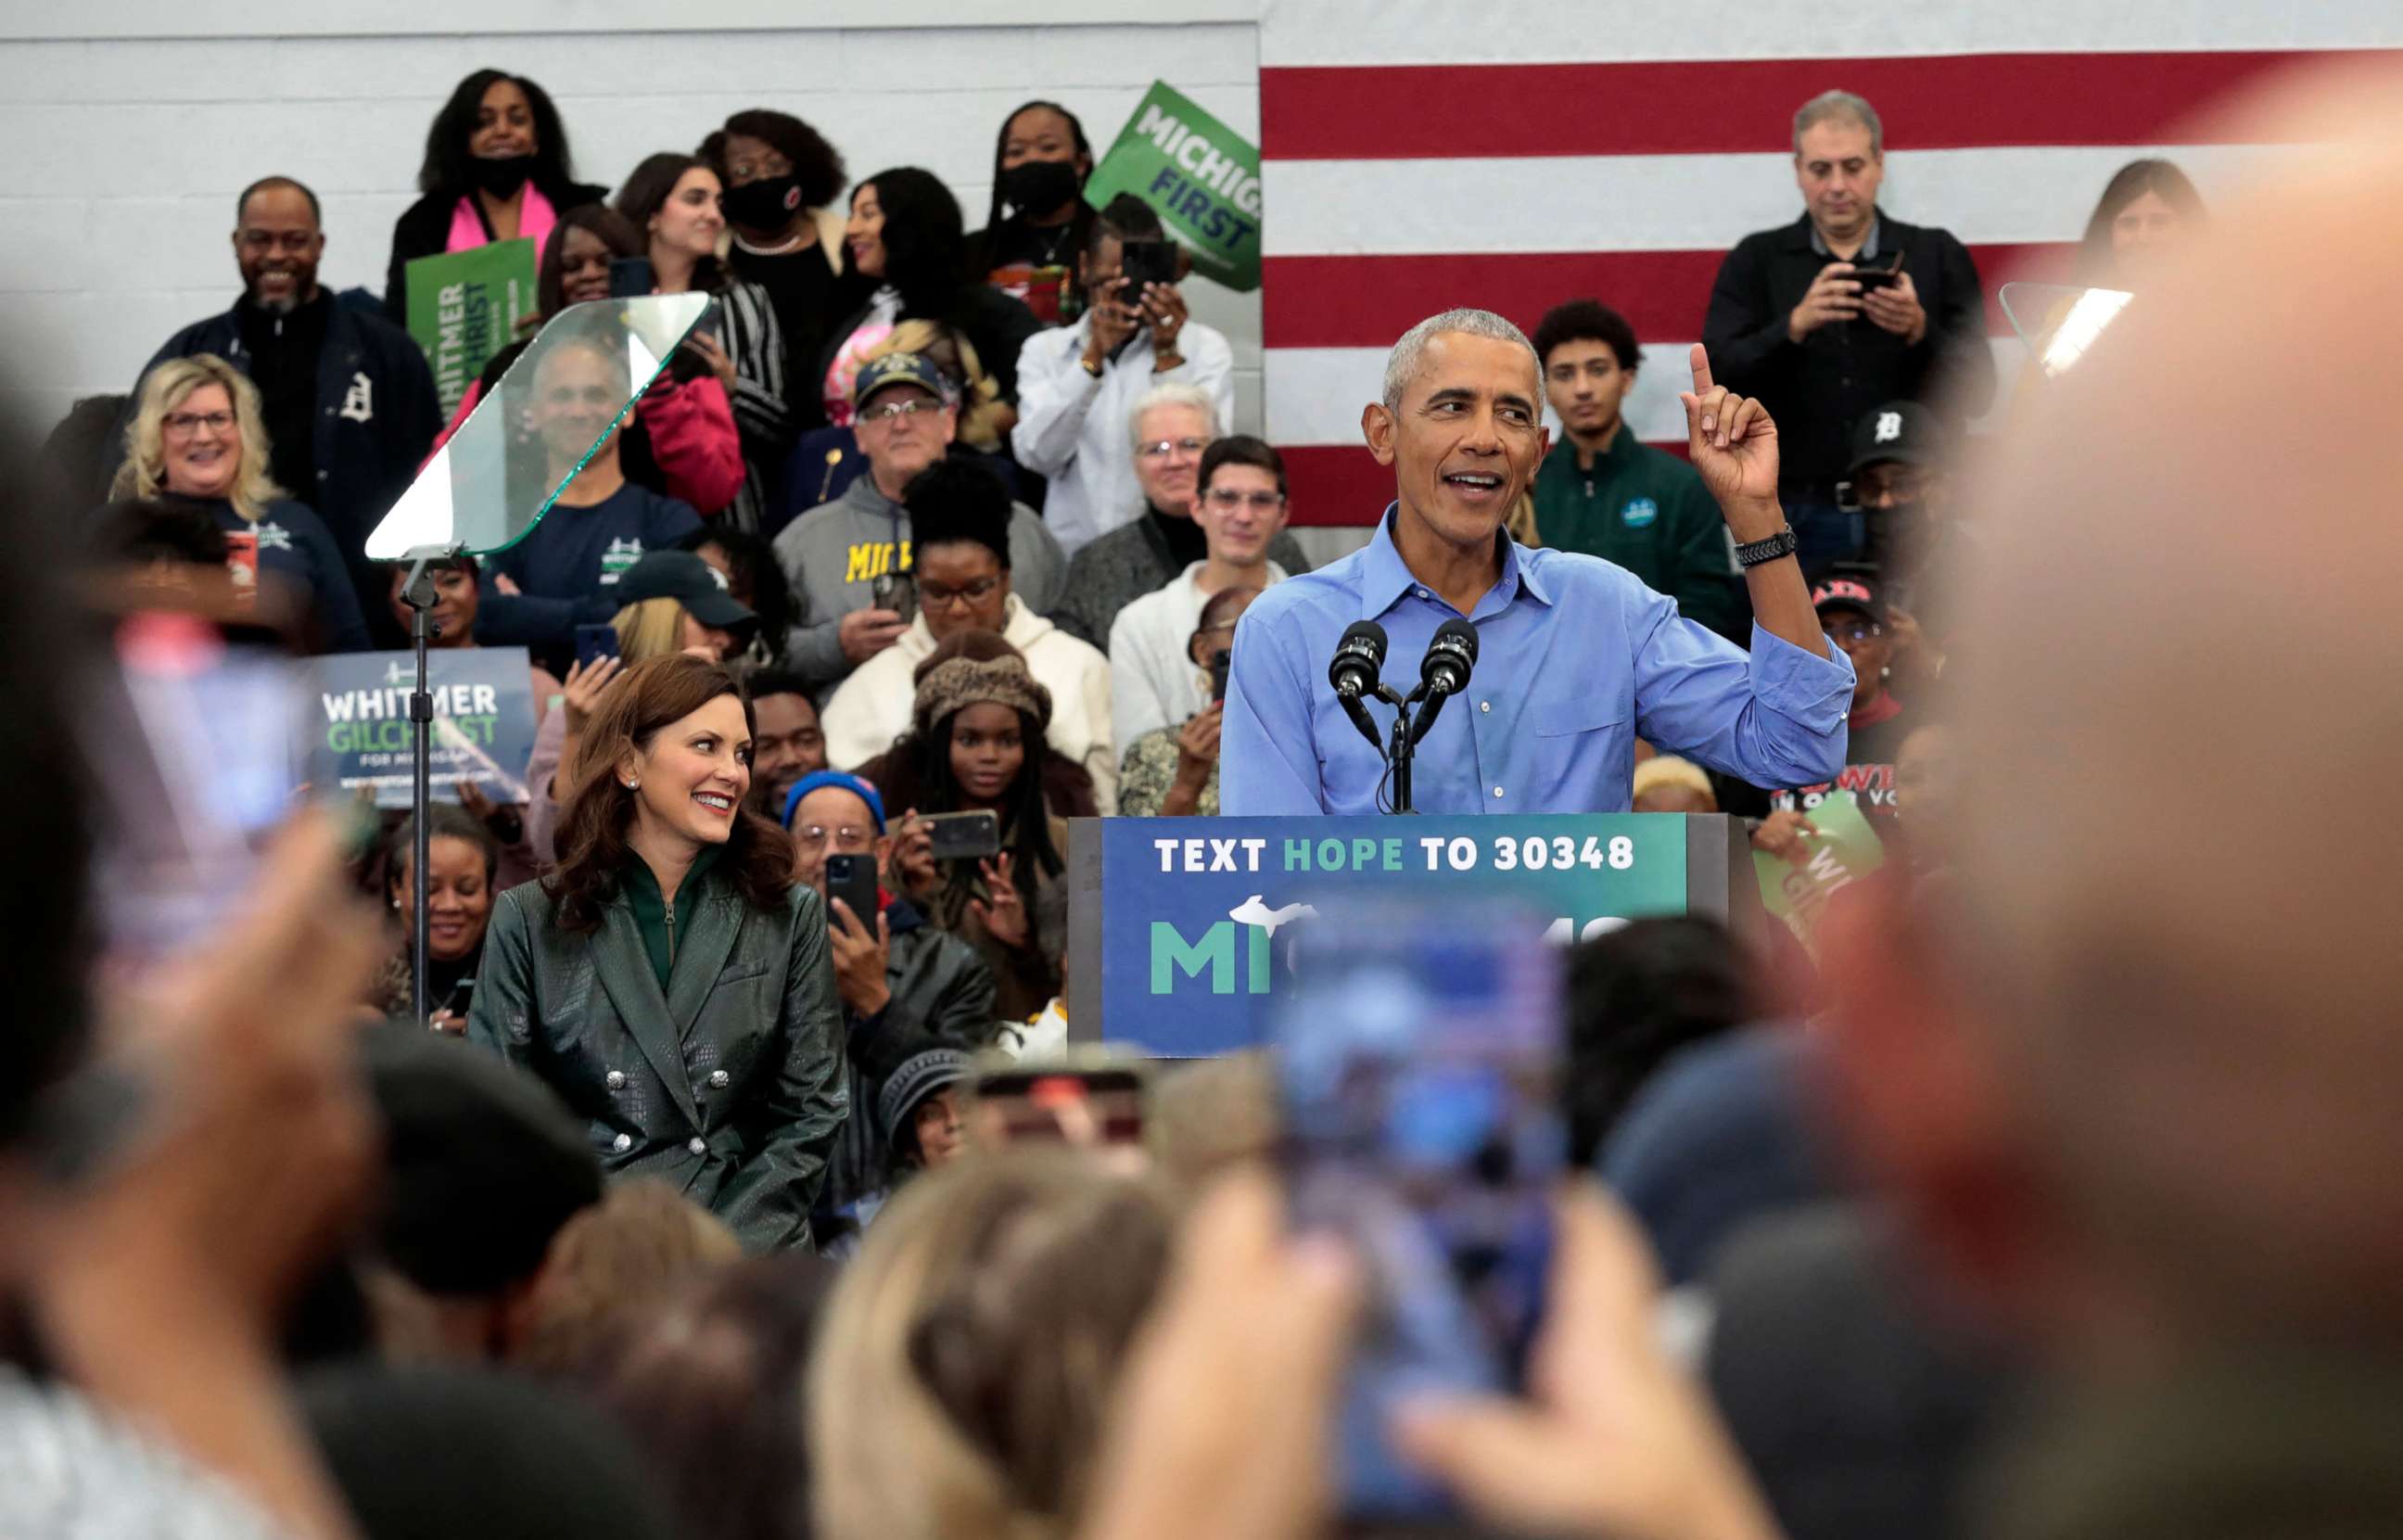 PHOTO: Former President Barack Obama campaigns for Michigan Governor Gretchen Whitmer during a "Get Out the Vote Rally" ahead of the midterm elections, at Renaissance High School in Detroit, Michigan, October 29, 2022.